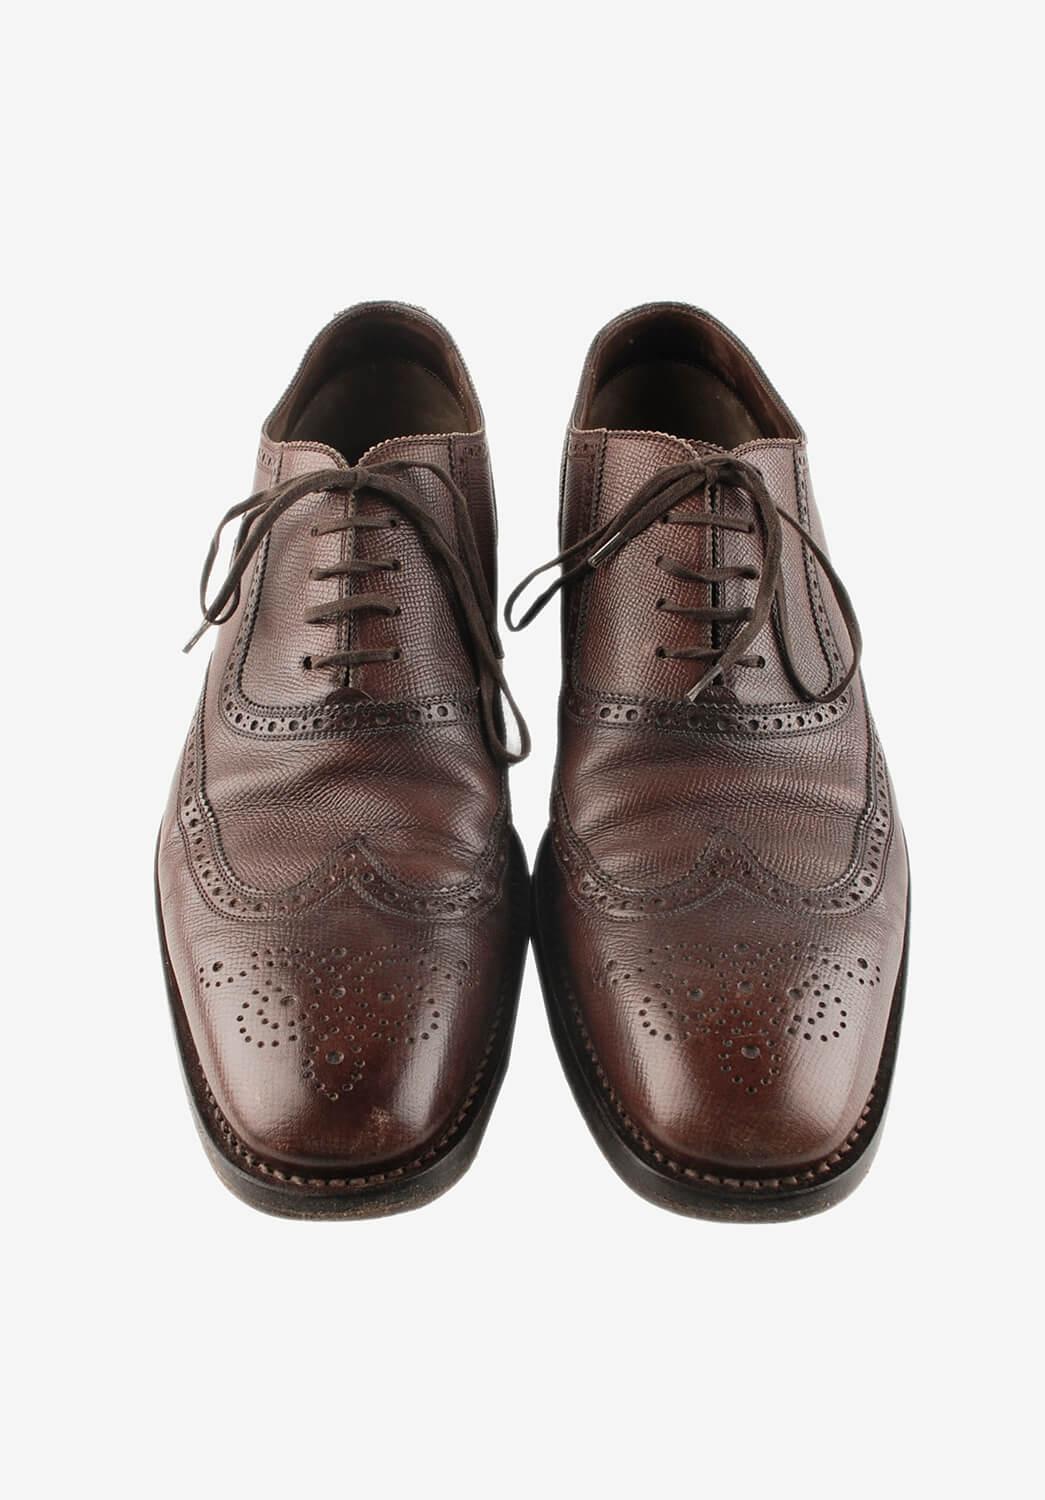 Tom Ford Derby Men Shoes 
Color: Brown
(An actual color may a bit vary due to individual computer screen interpretation)
Material: leather
Tag size: 11 - EUR44
These shoes are great quality item. Rate 8.5 of 10, very good condition.
Actual 